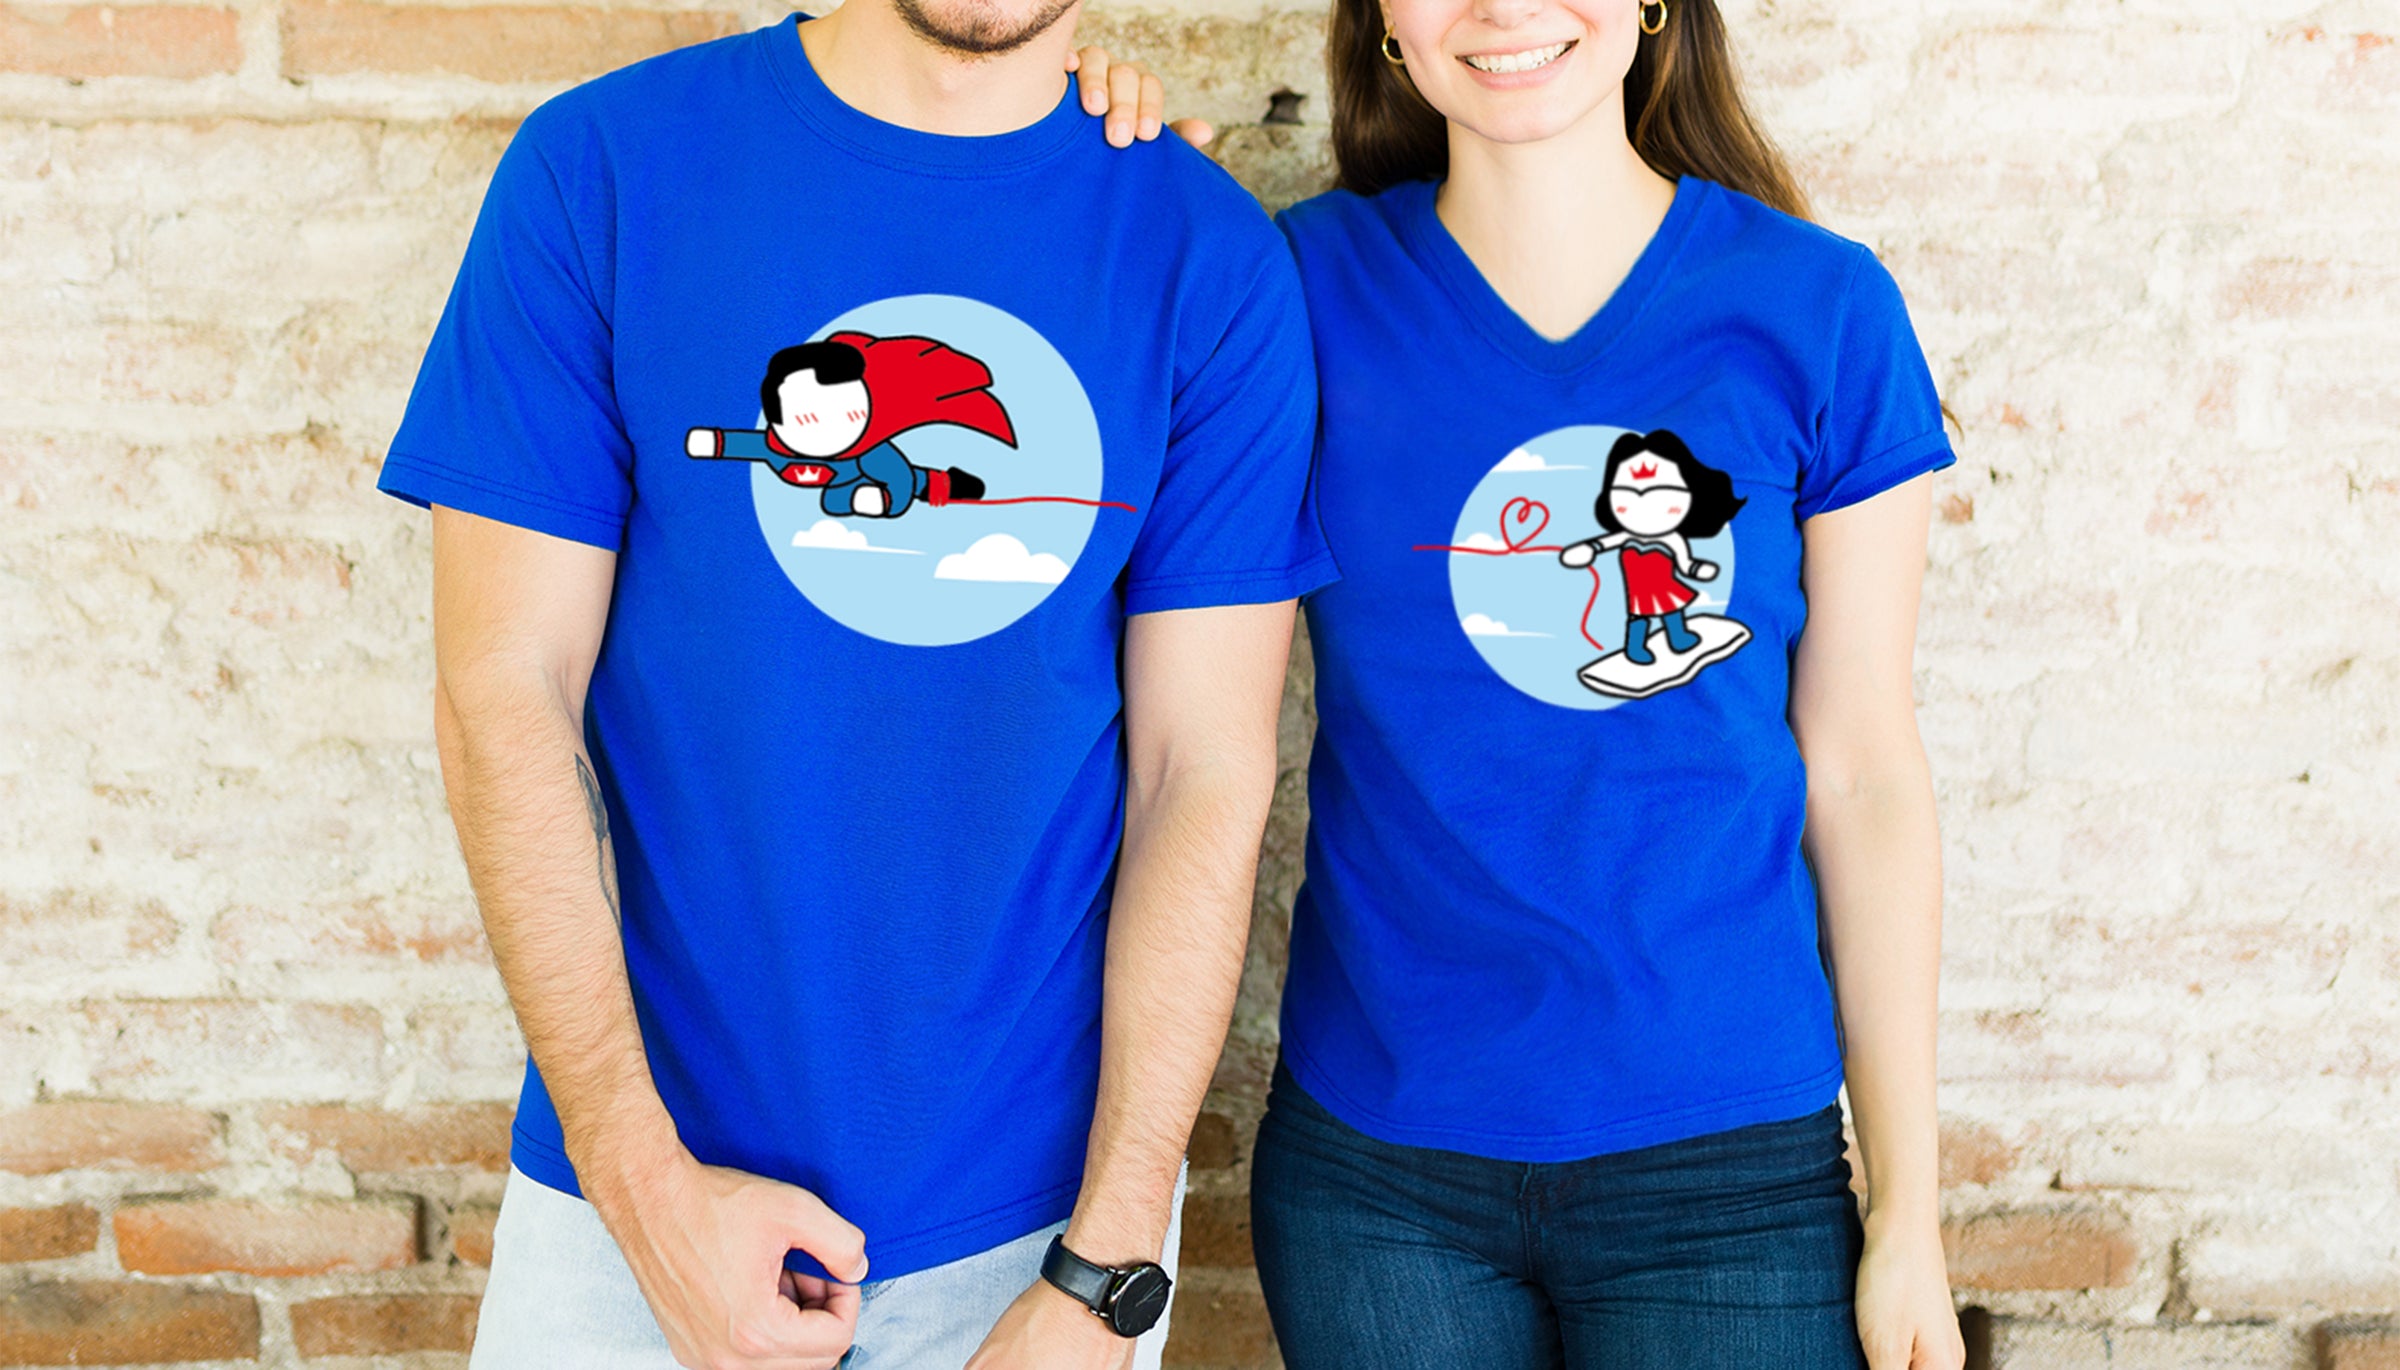 BoldLoft His and Hers Couple Shirts and Pillowcases with Superhero Designs